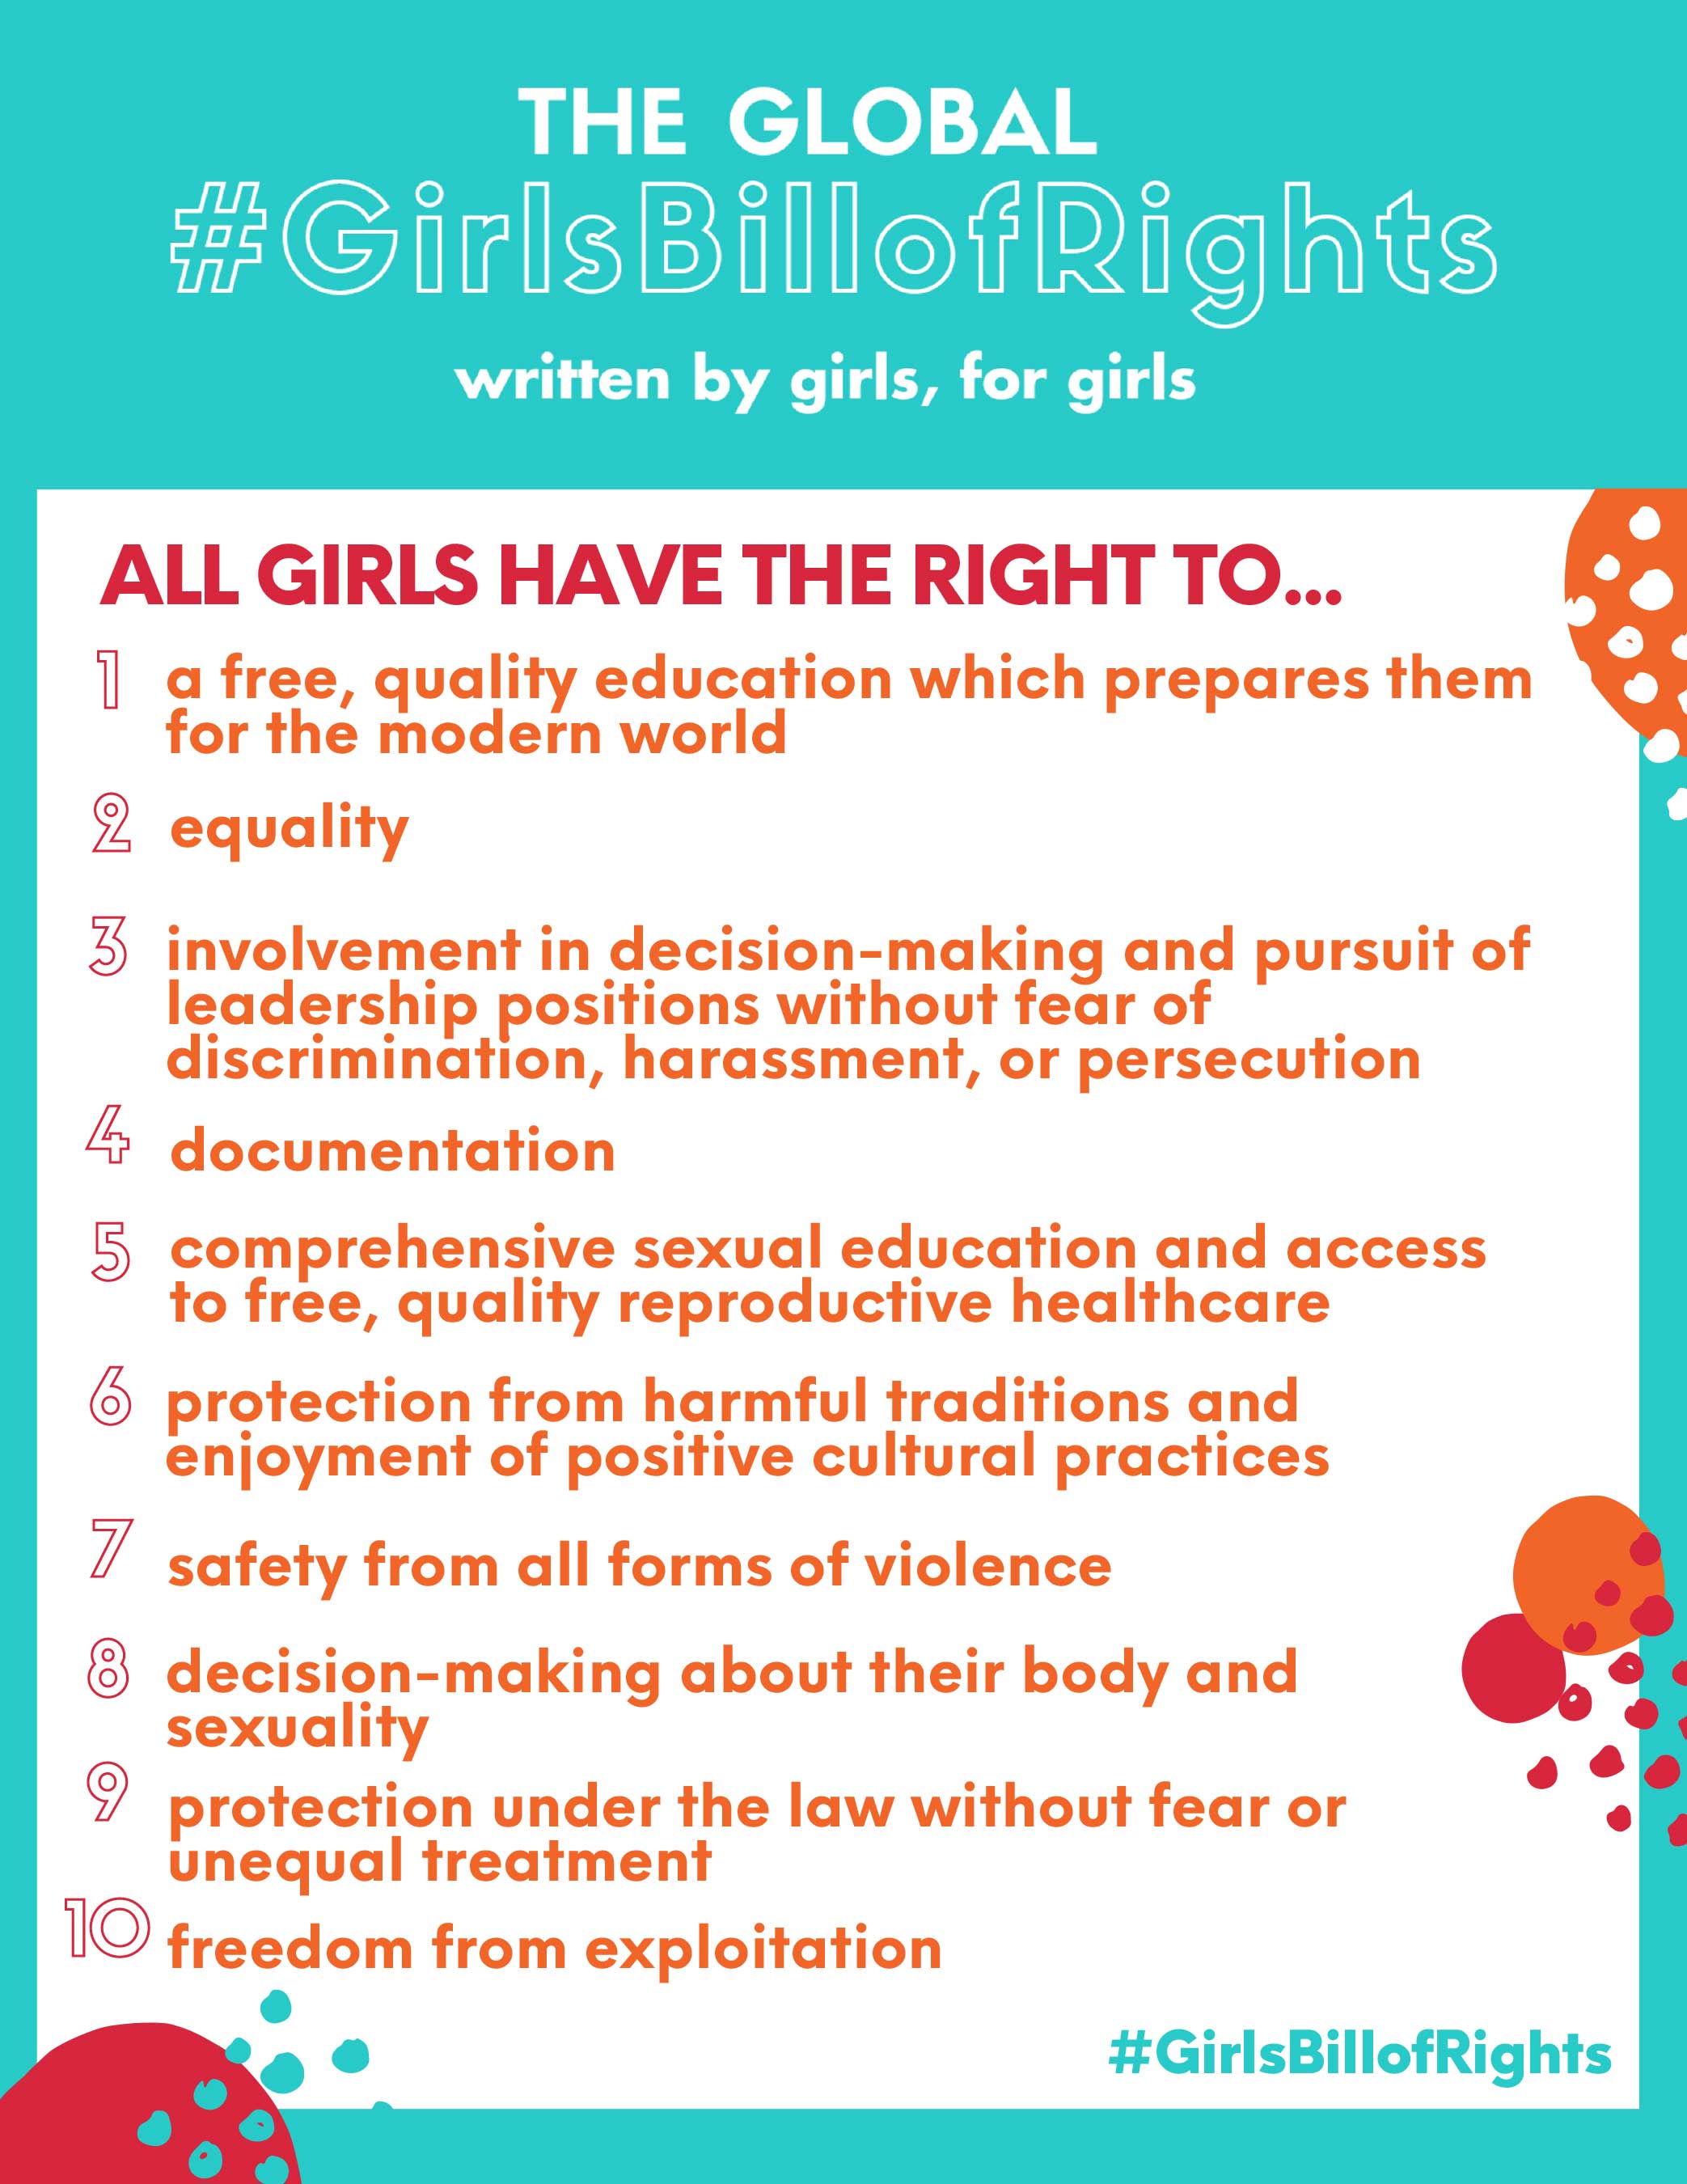 The Global Girls’ Bill of Rights is a declaration of the rights all girls are entitled to, written by girls, for girls. It was unveiled at the UN on October 10, 2019, leading into International Day of the Girl.